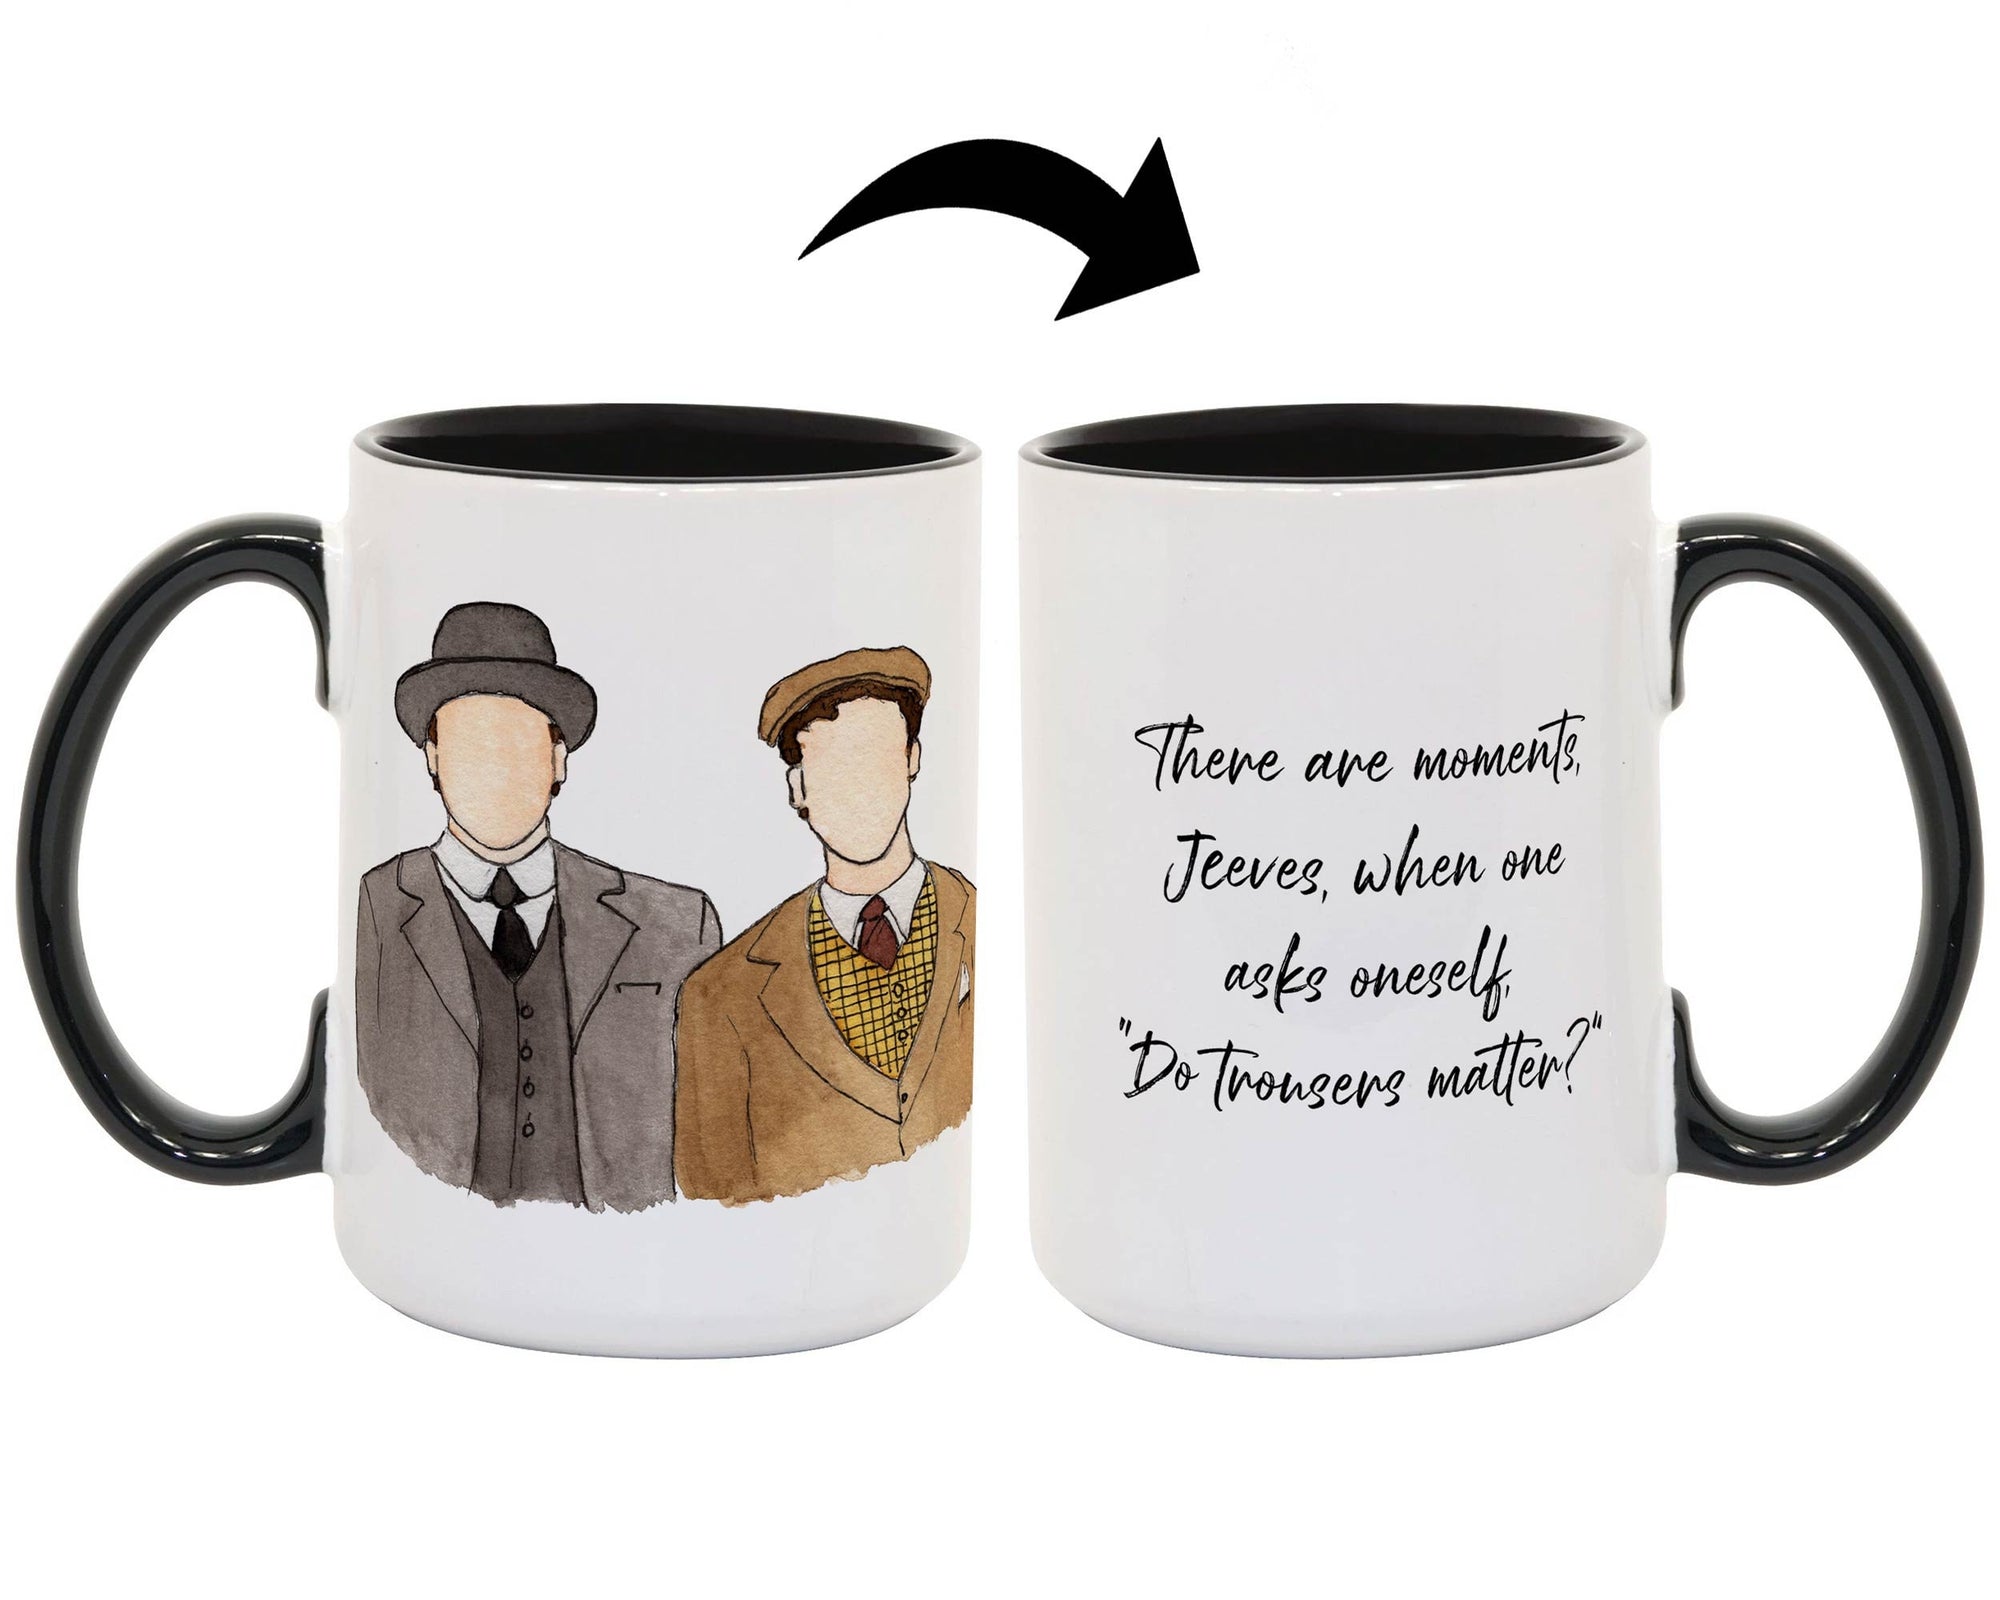 Jeeves & Wooster Quote Mug (P. G. Wodehouse)